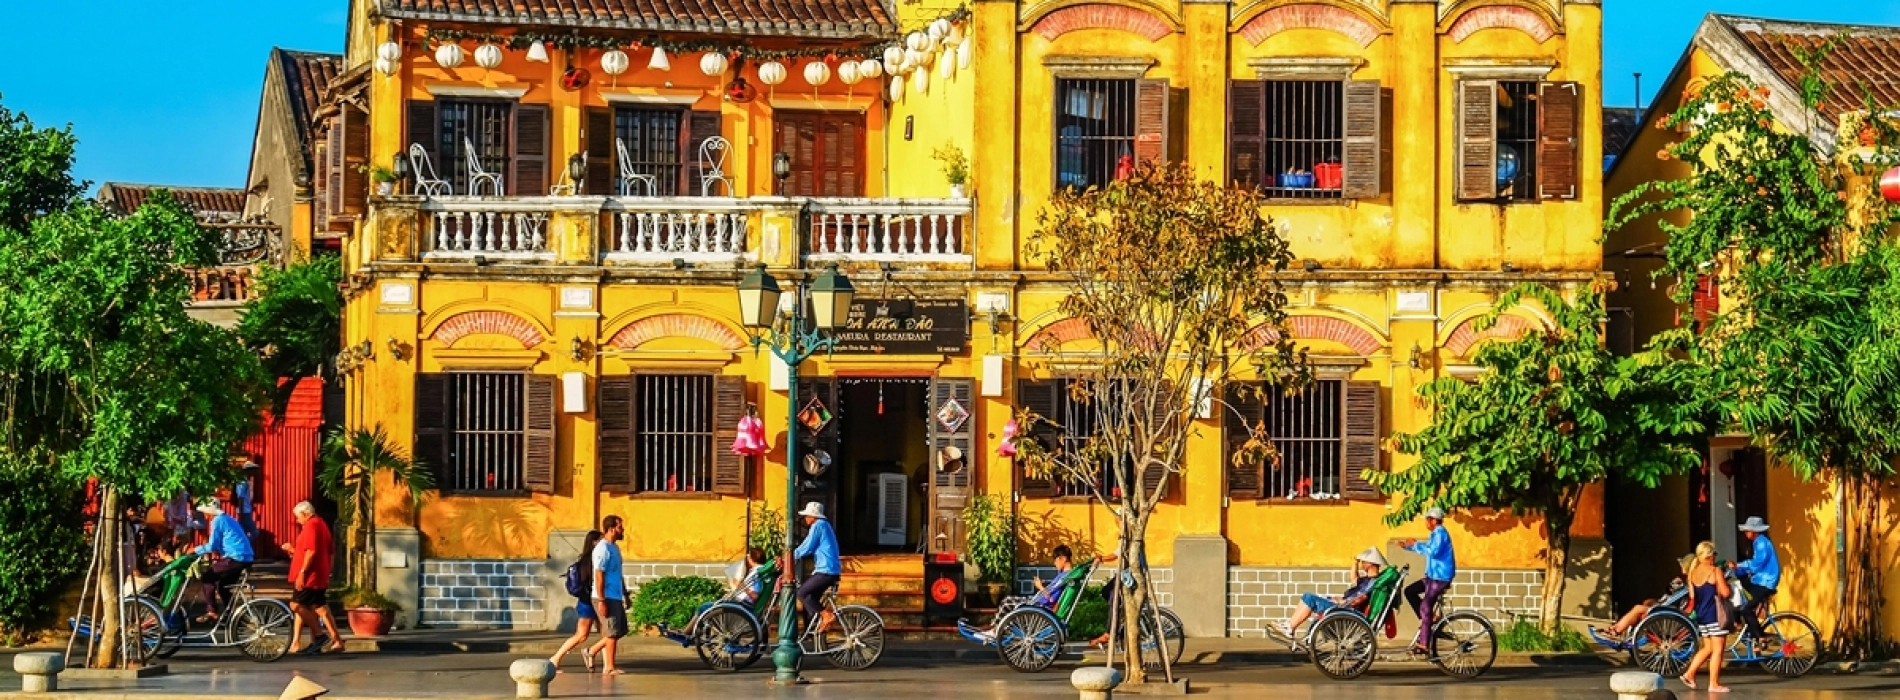 Shopping and handicraft paradise in Hoi An